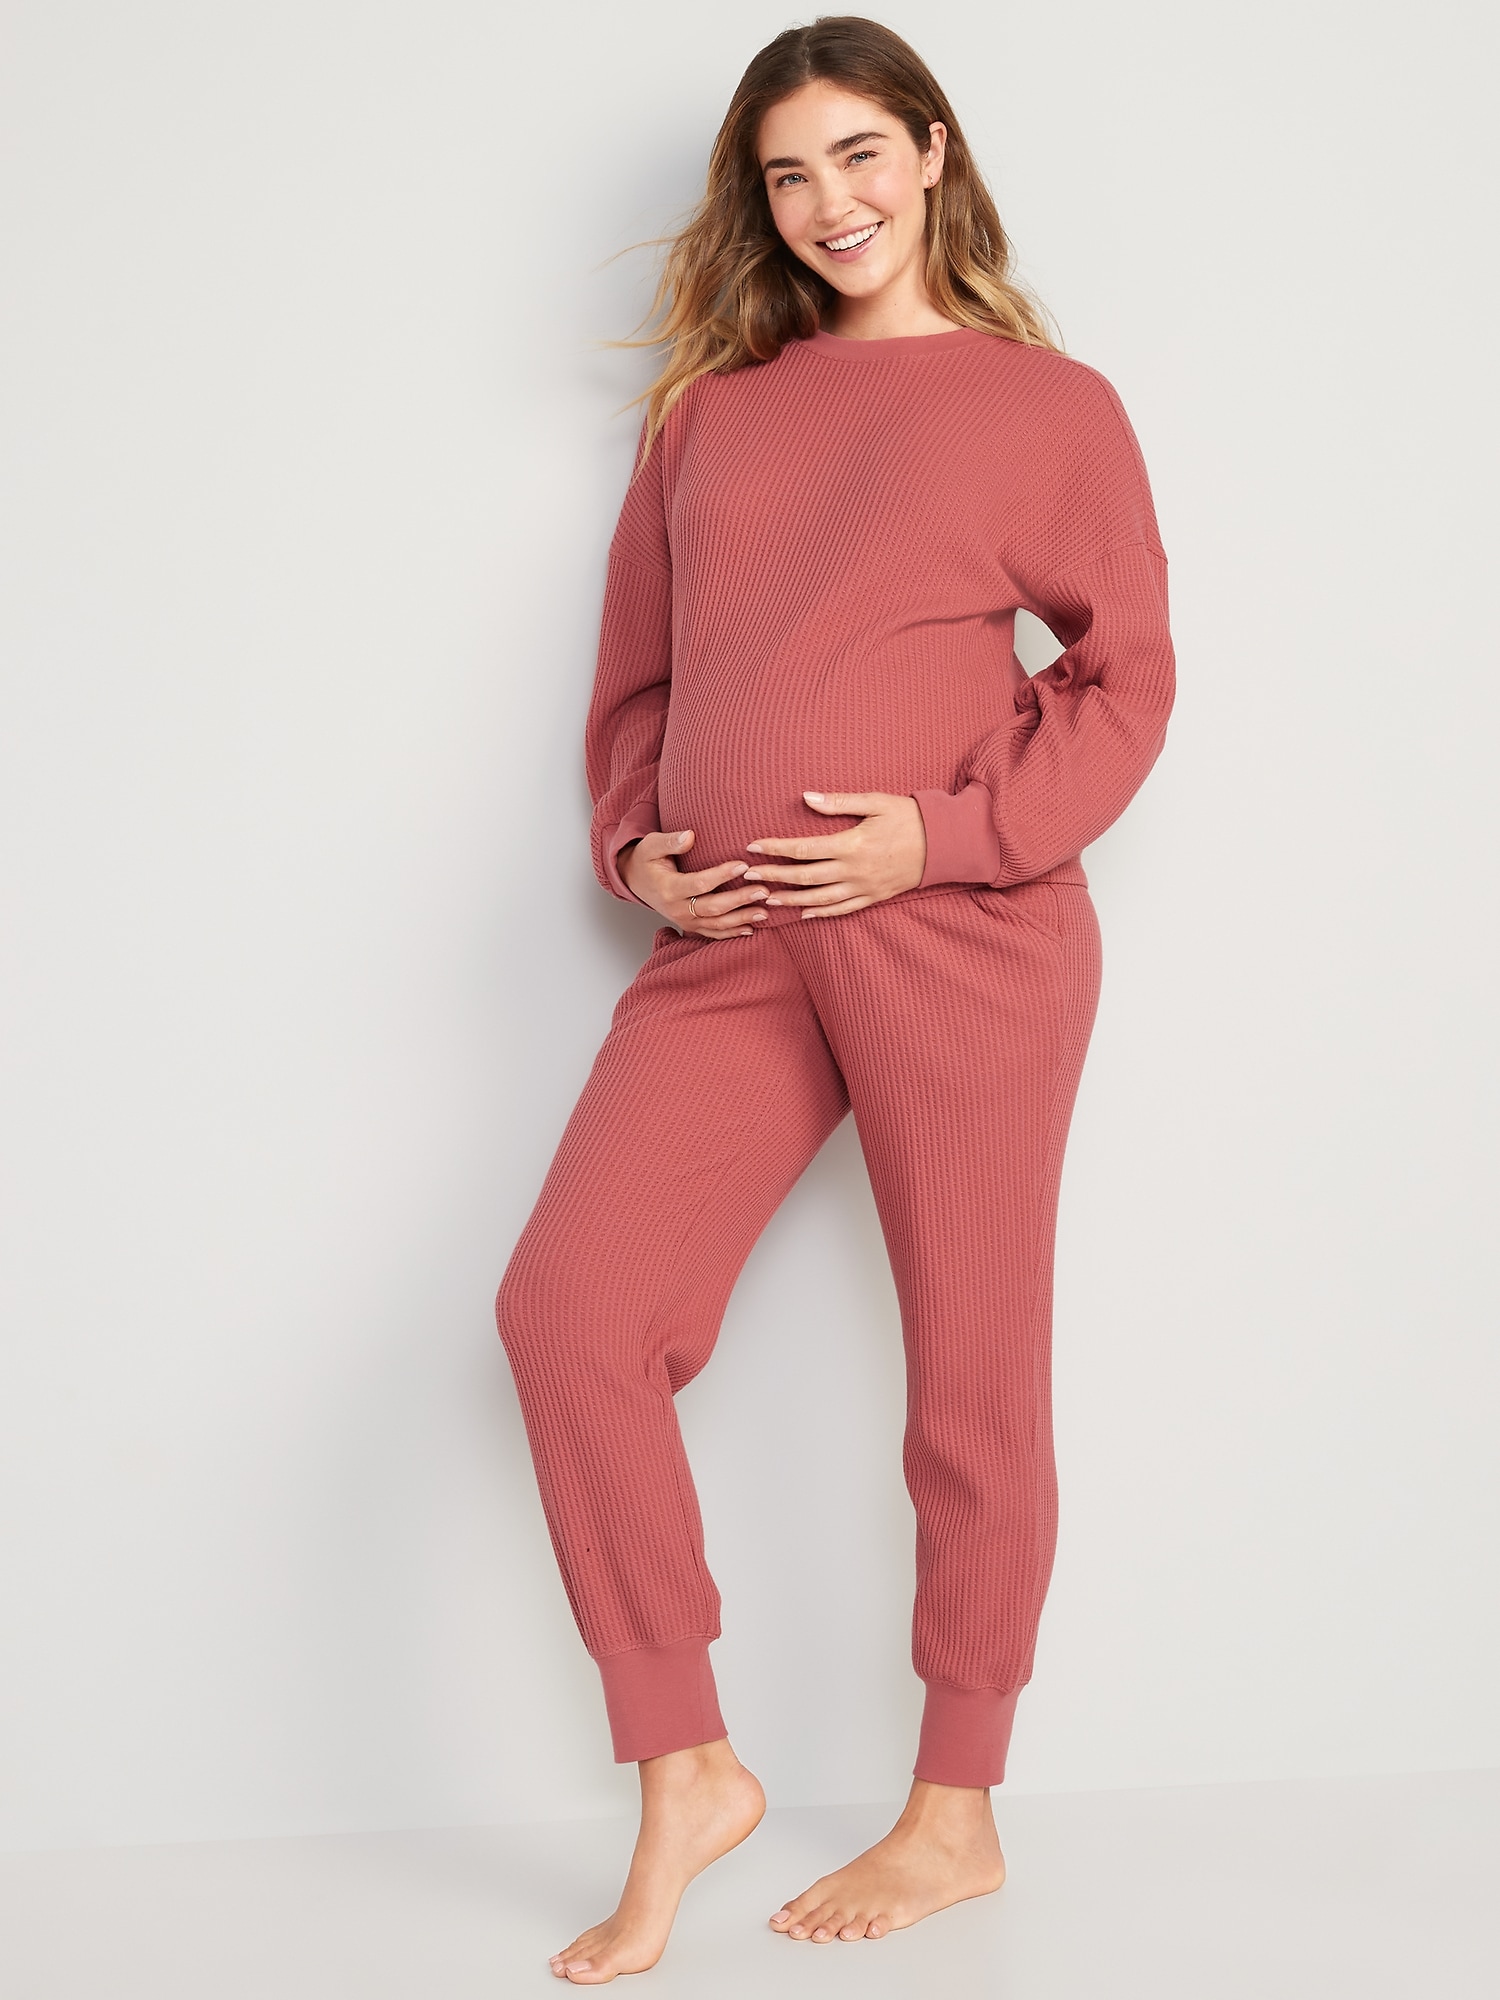 Old Navy Maternity Jersey-Knit 4-Piece Essentials Kit